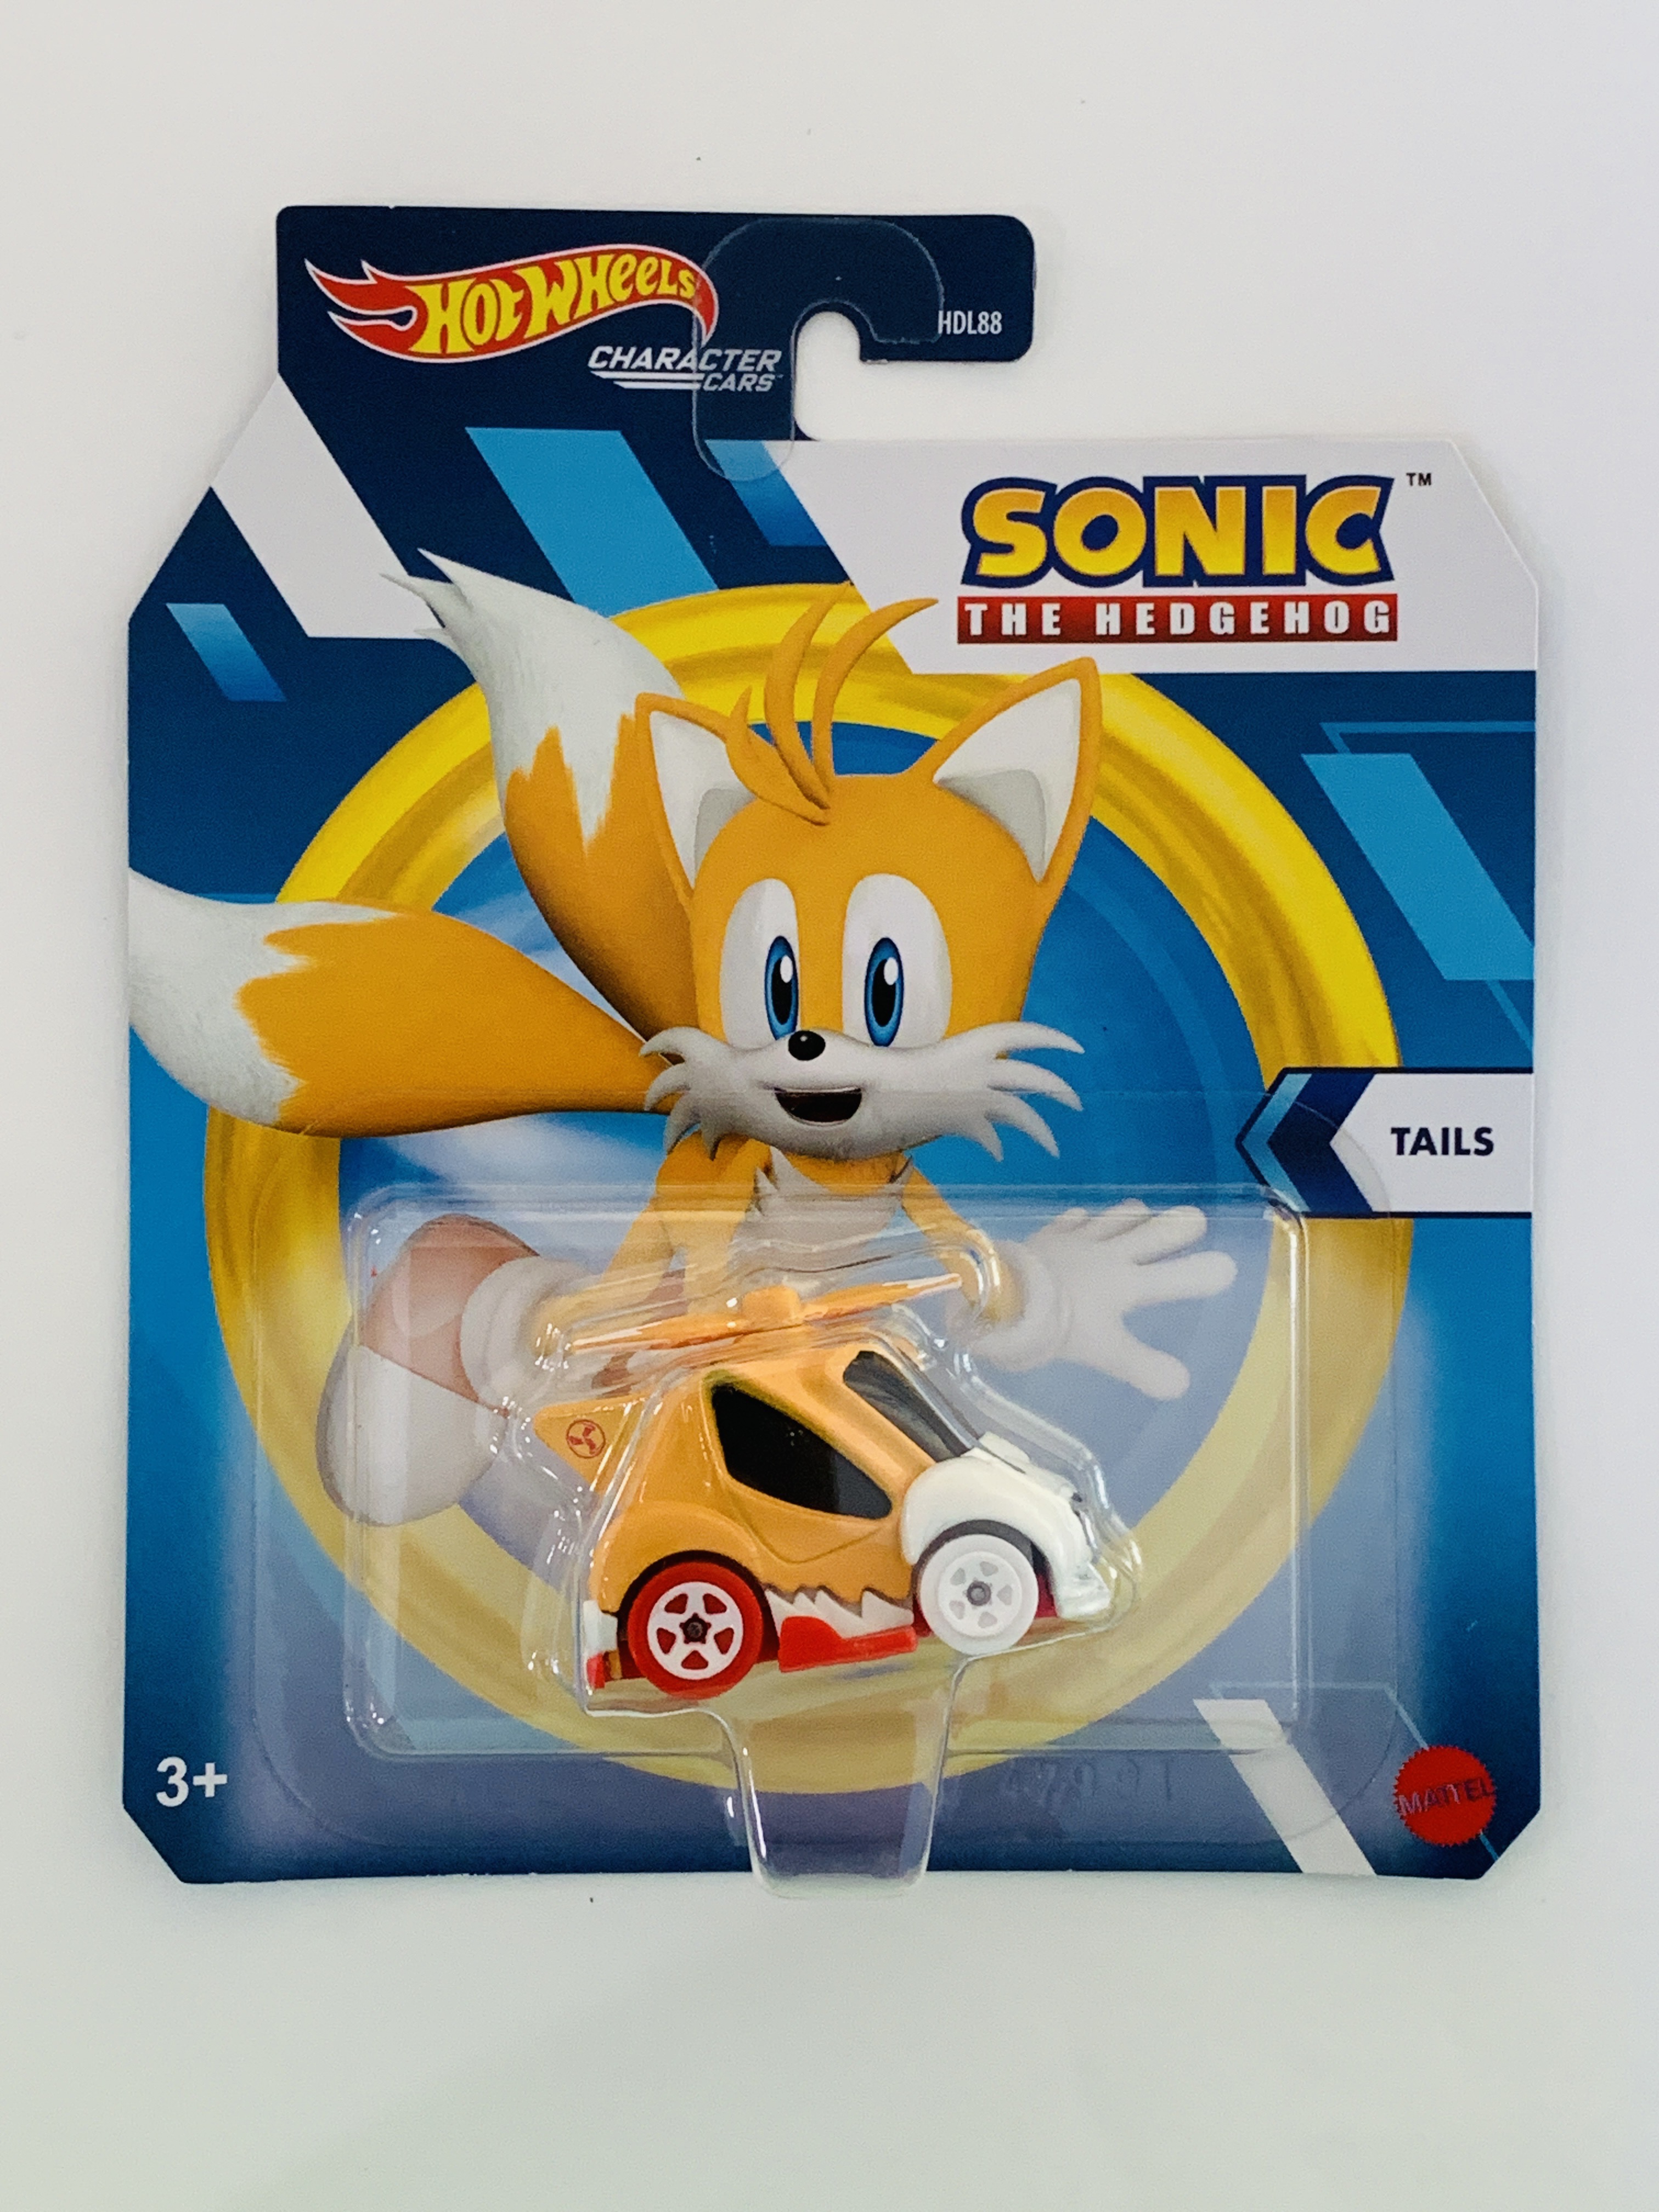 Hot Wheels Character Cars Sonic The Hedgehog Tails